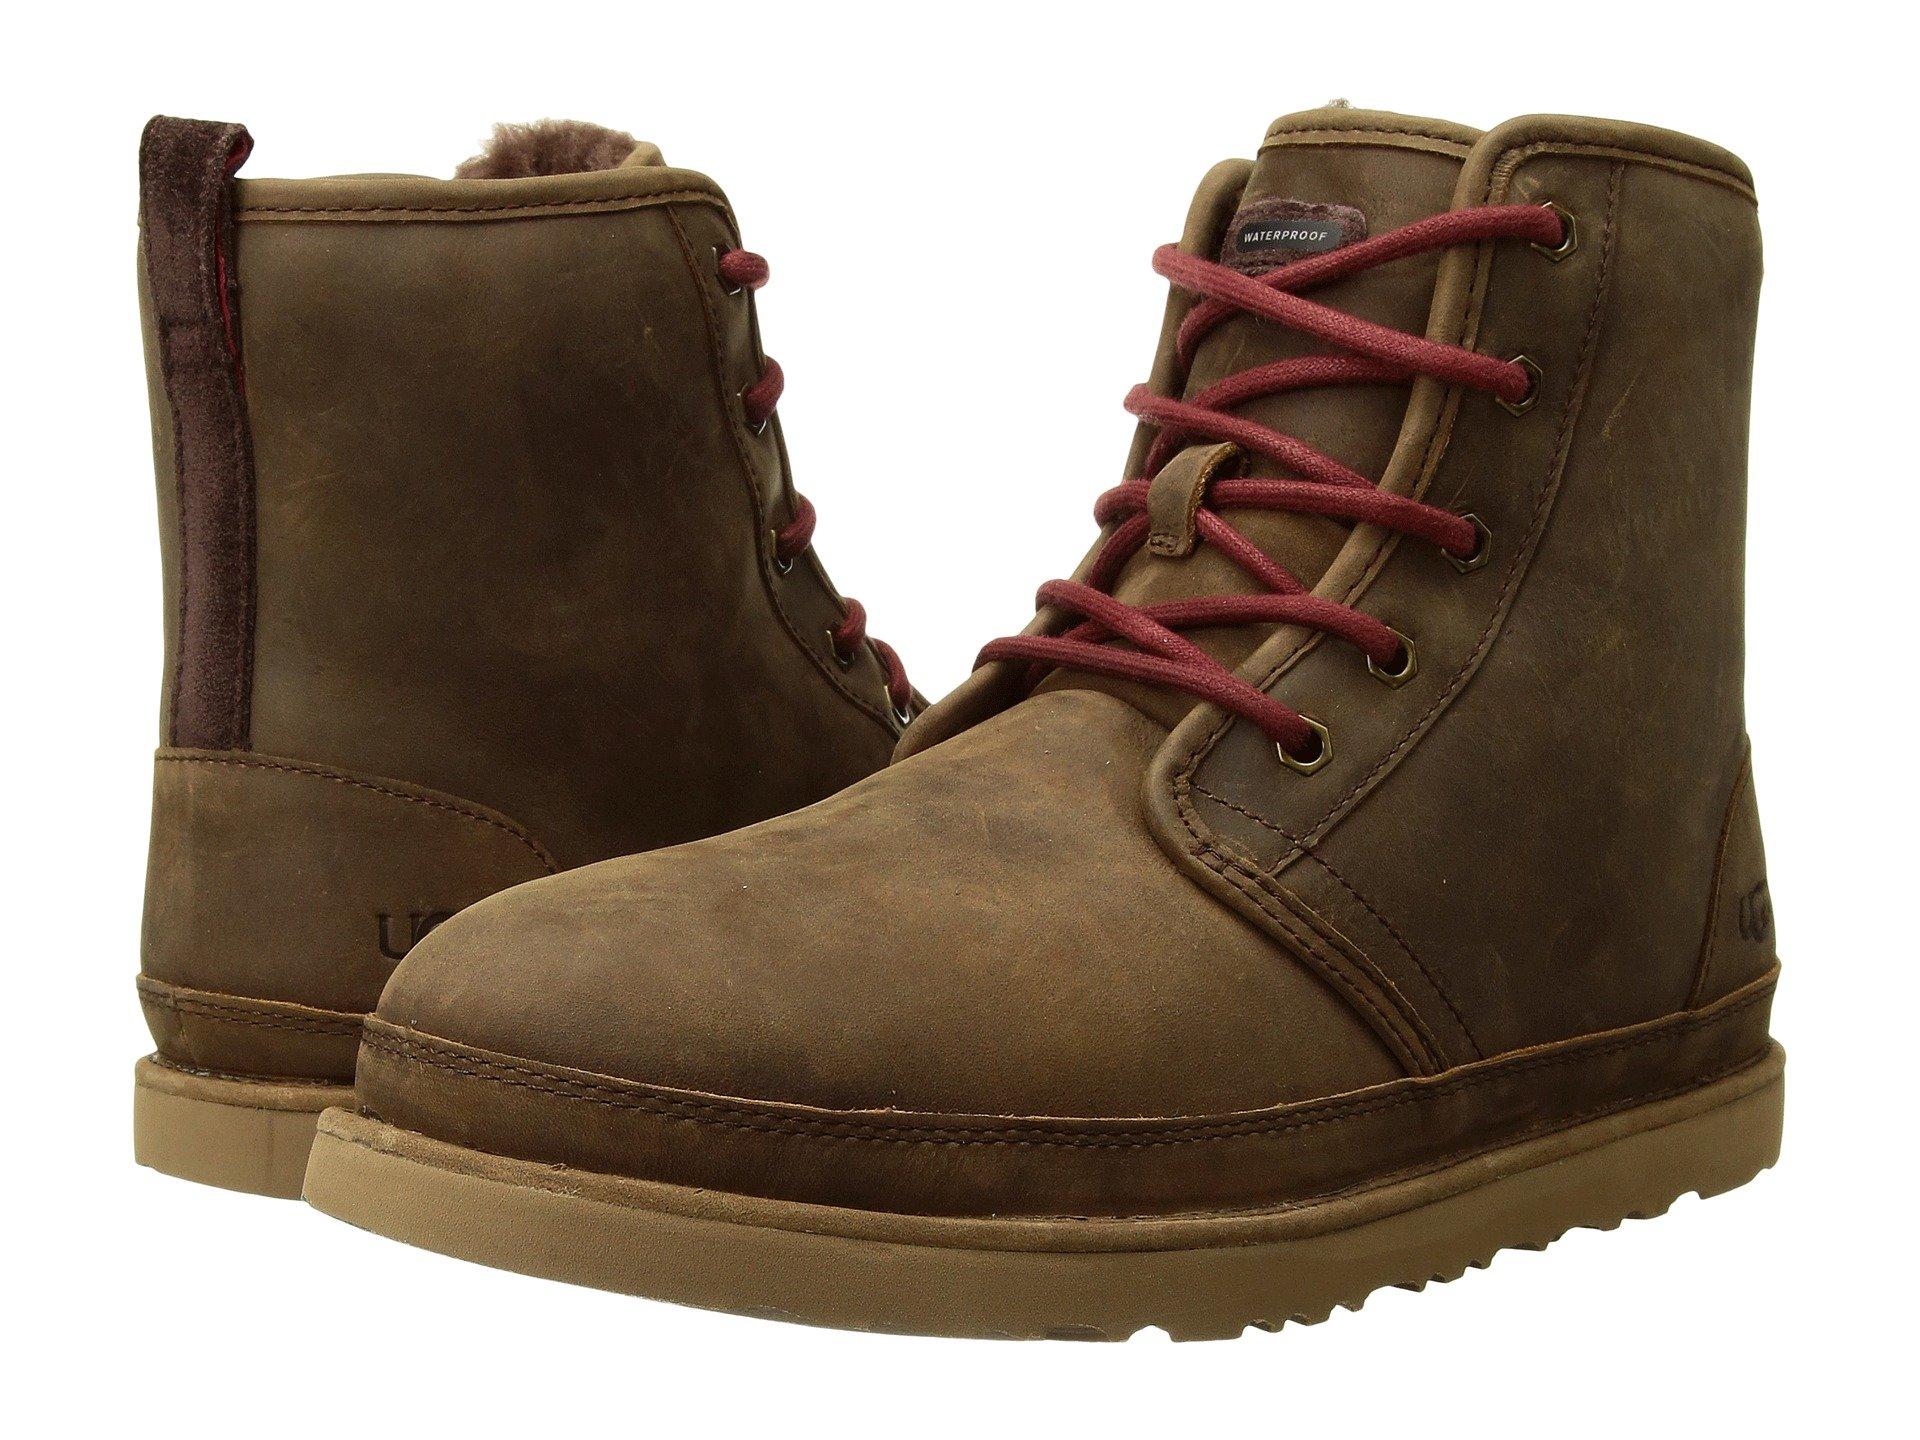 UGG Leather Harkley Waterproof Boots in Chestnut (Brown) for Men - Save 51%  | Lyst